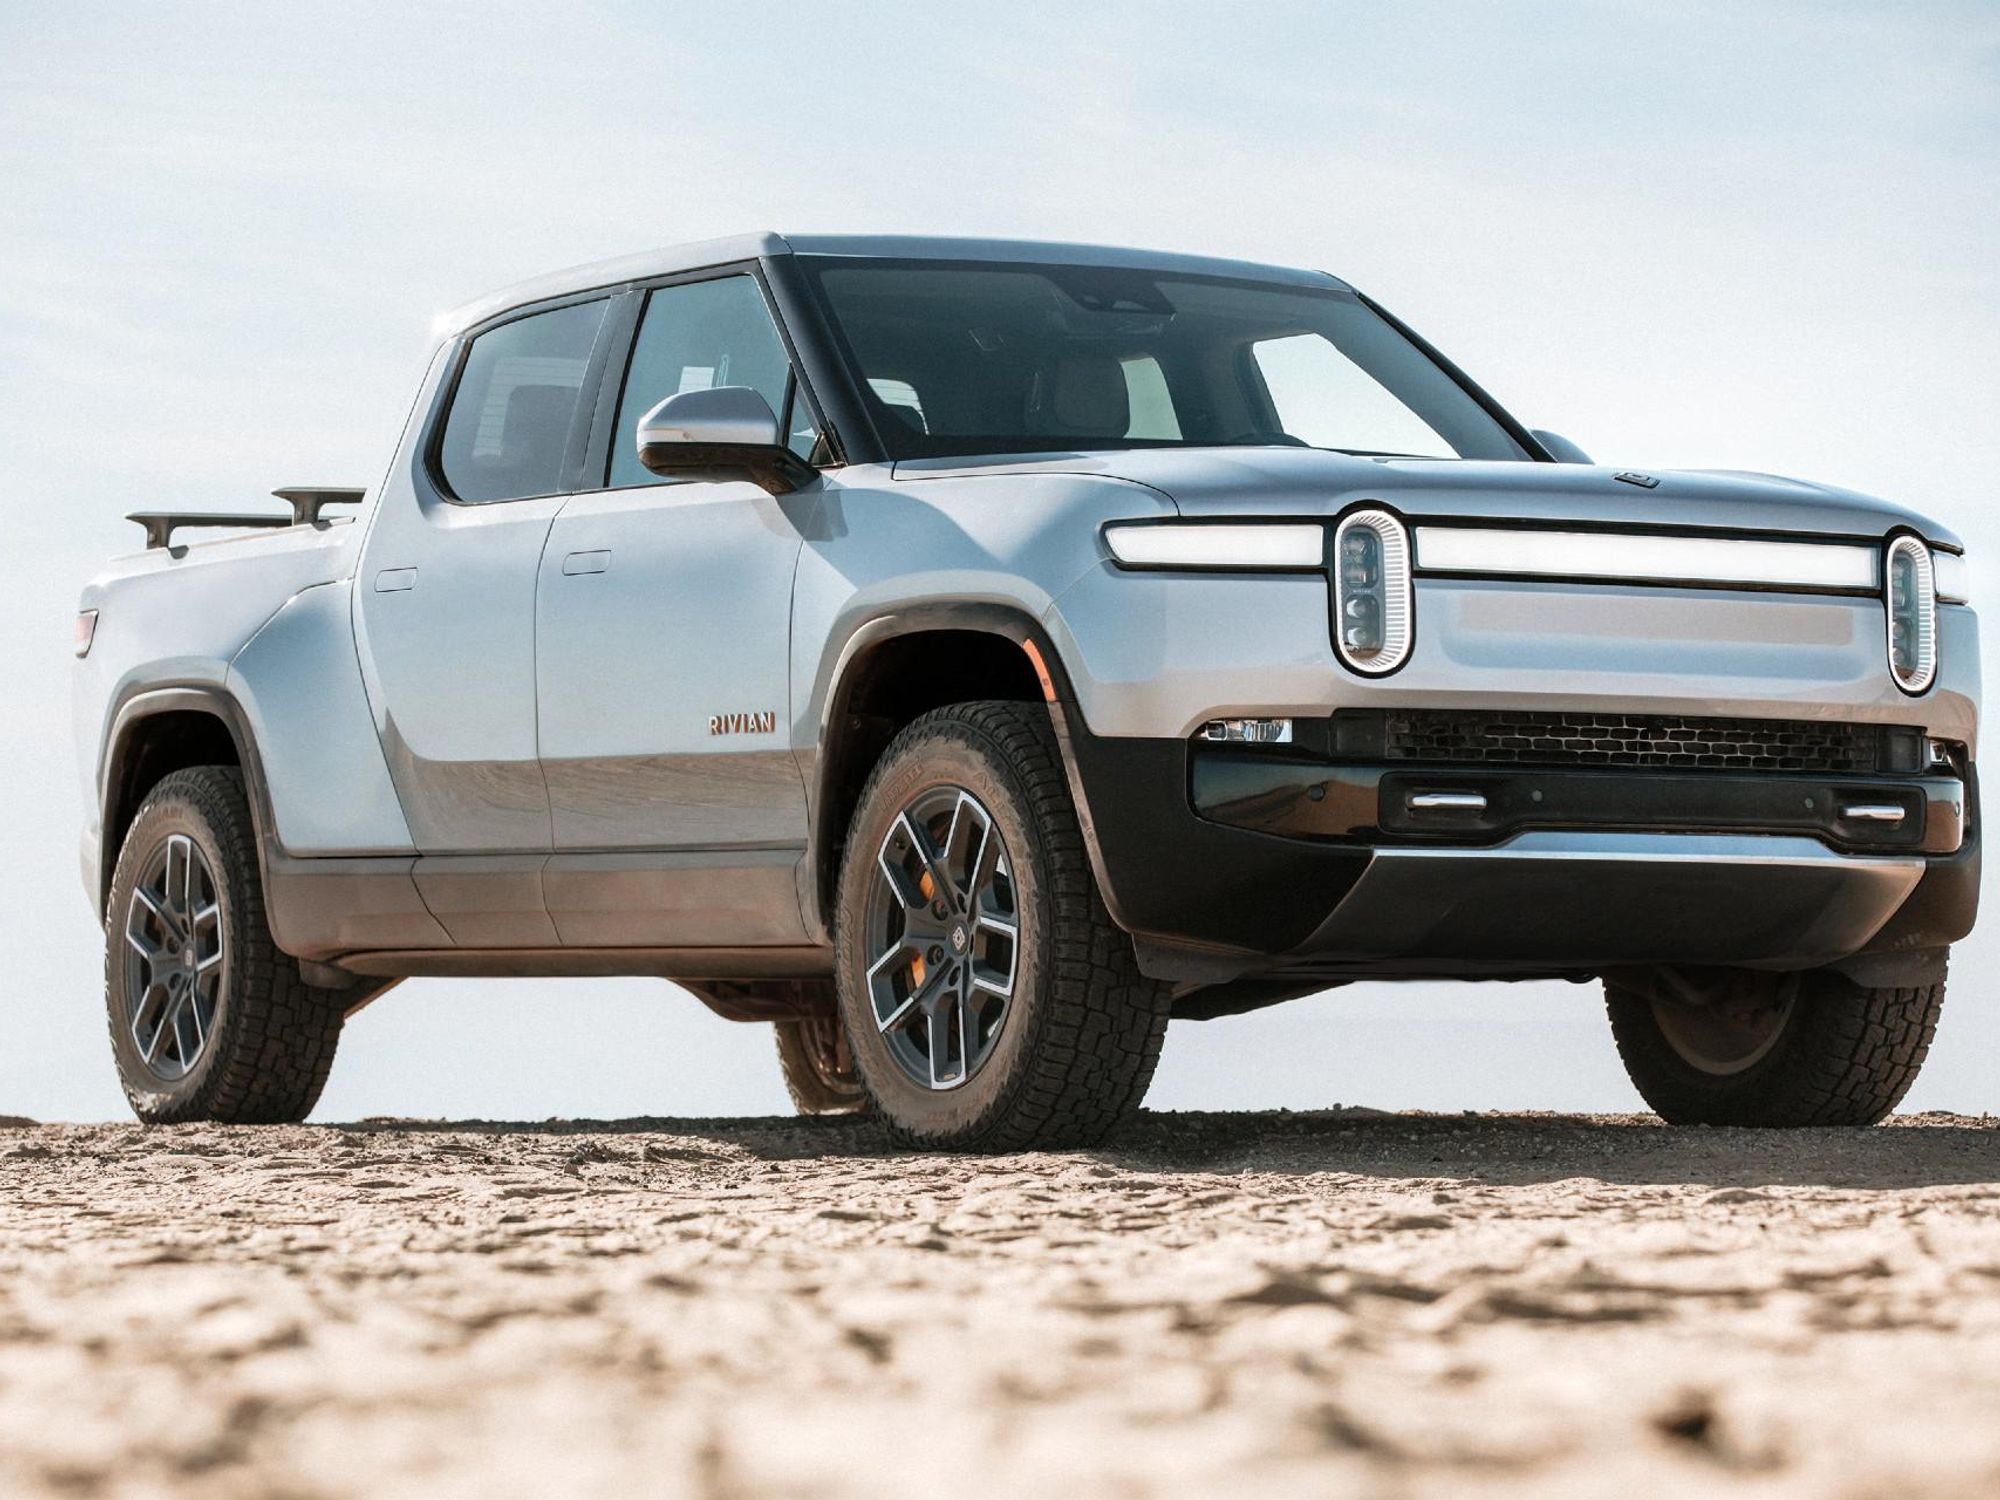 Rivian Sets Ambitious Production Goals for Electric Vehicles in 2022 Despite Supply Chain Disruptions